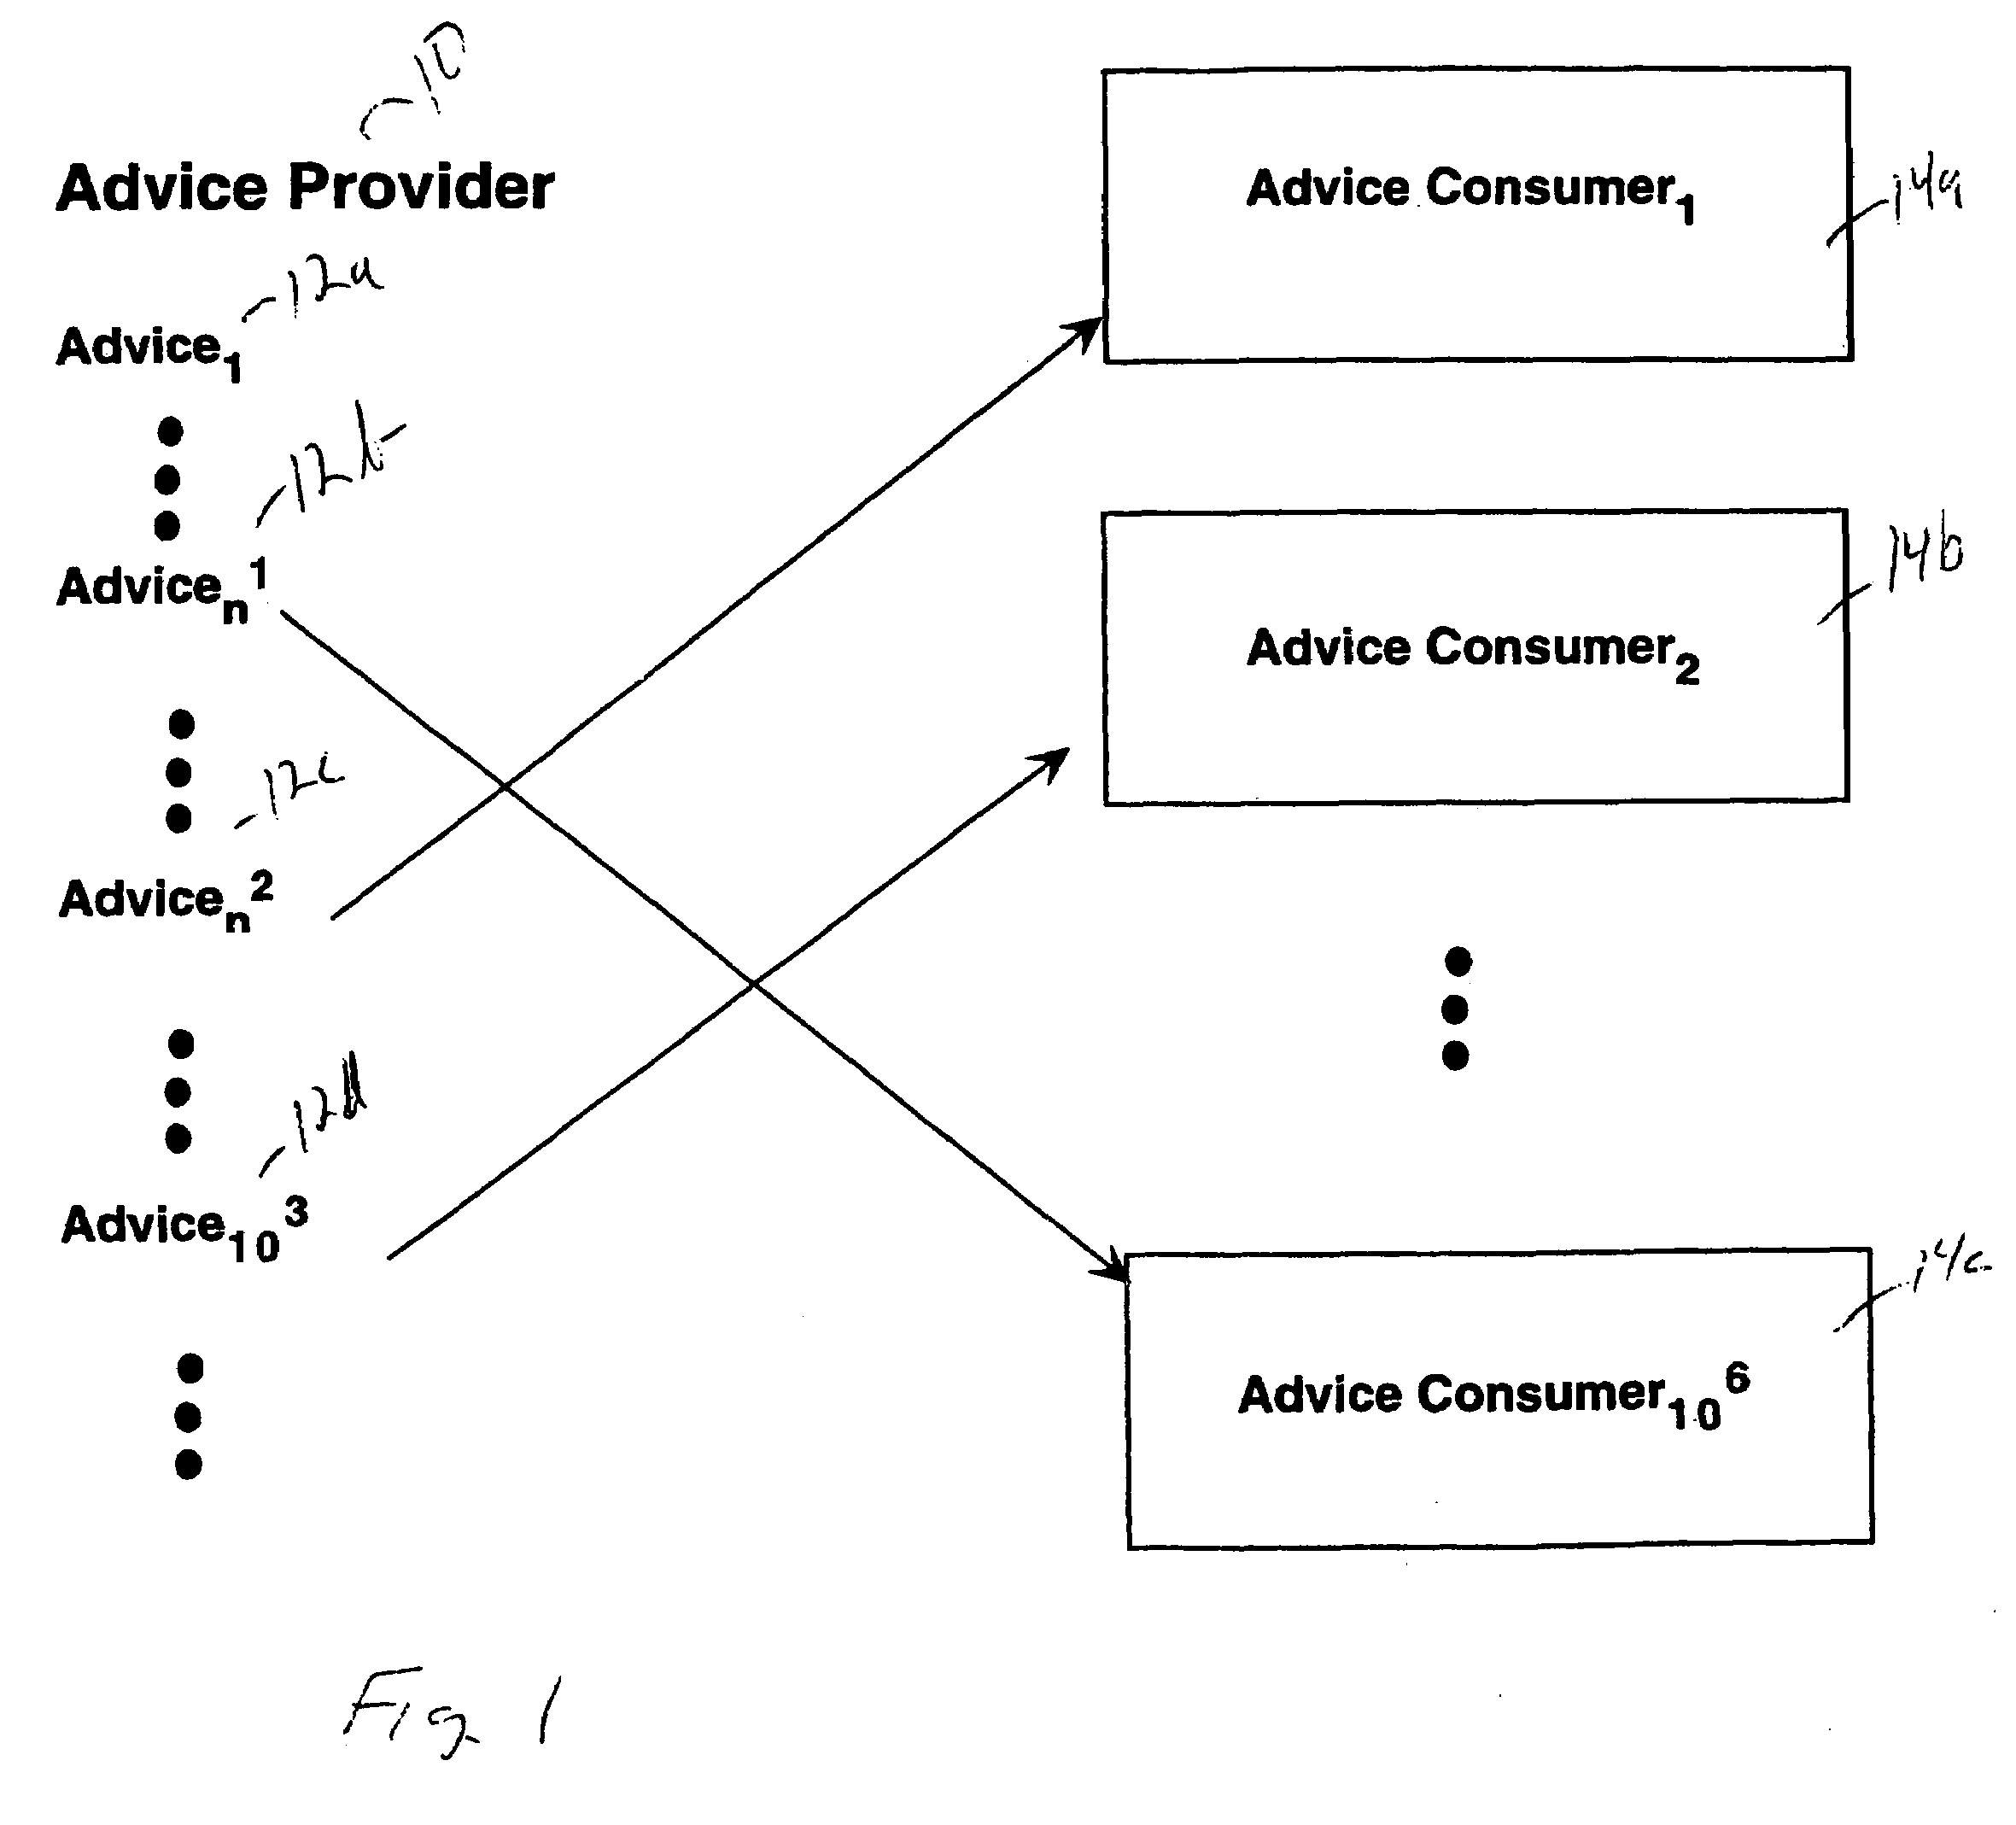 Relevance clause for computed relevance messaging